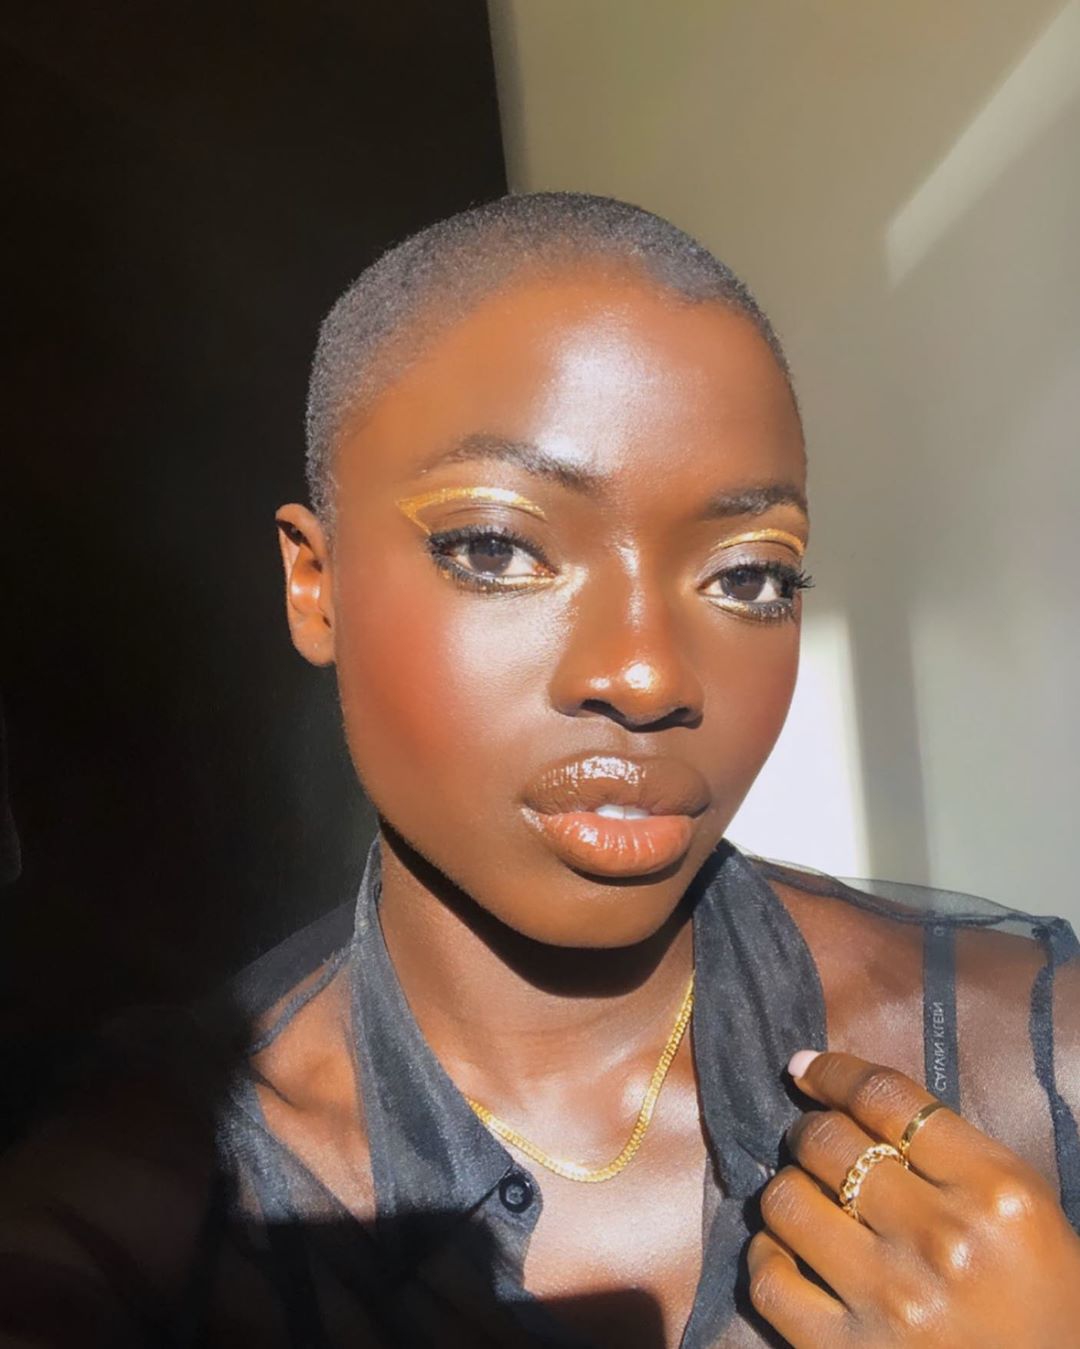 Influencers who nailed the baldie look